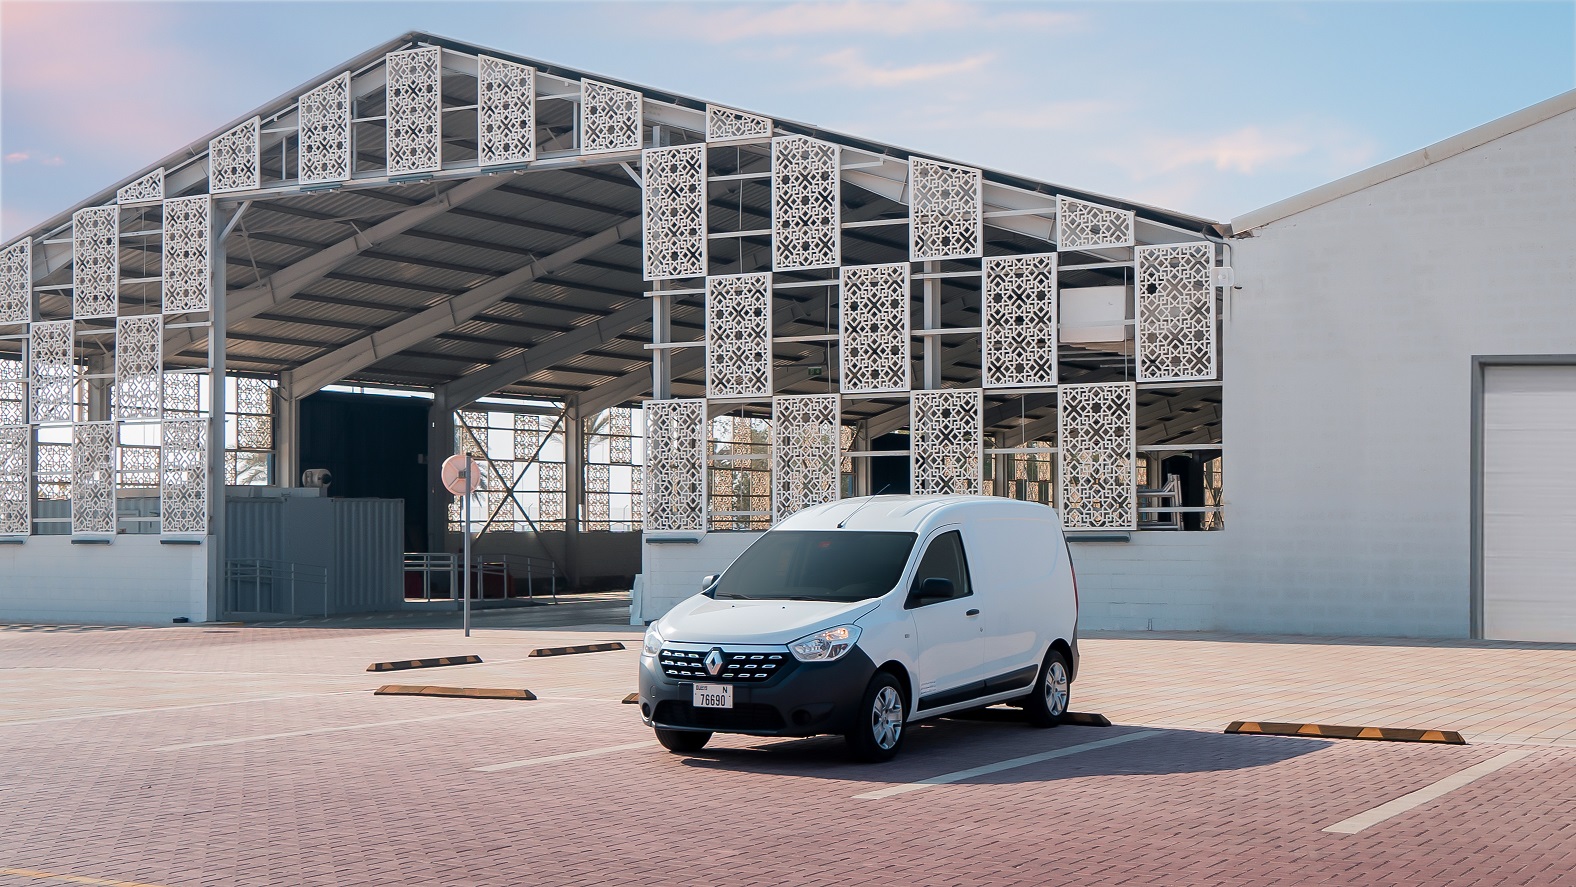 Meet the Renault Dokker – a model of utility and style